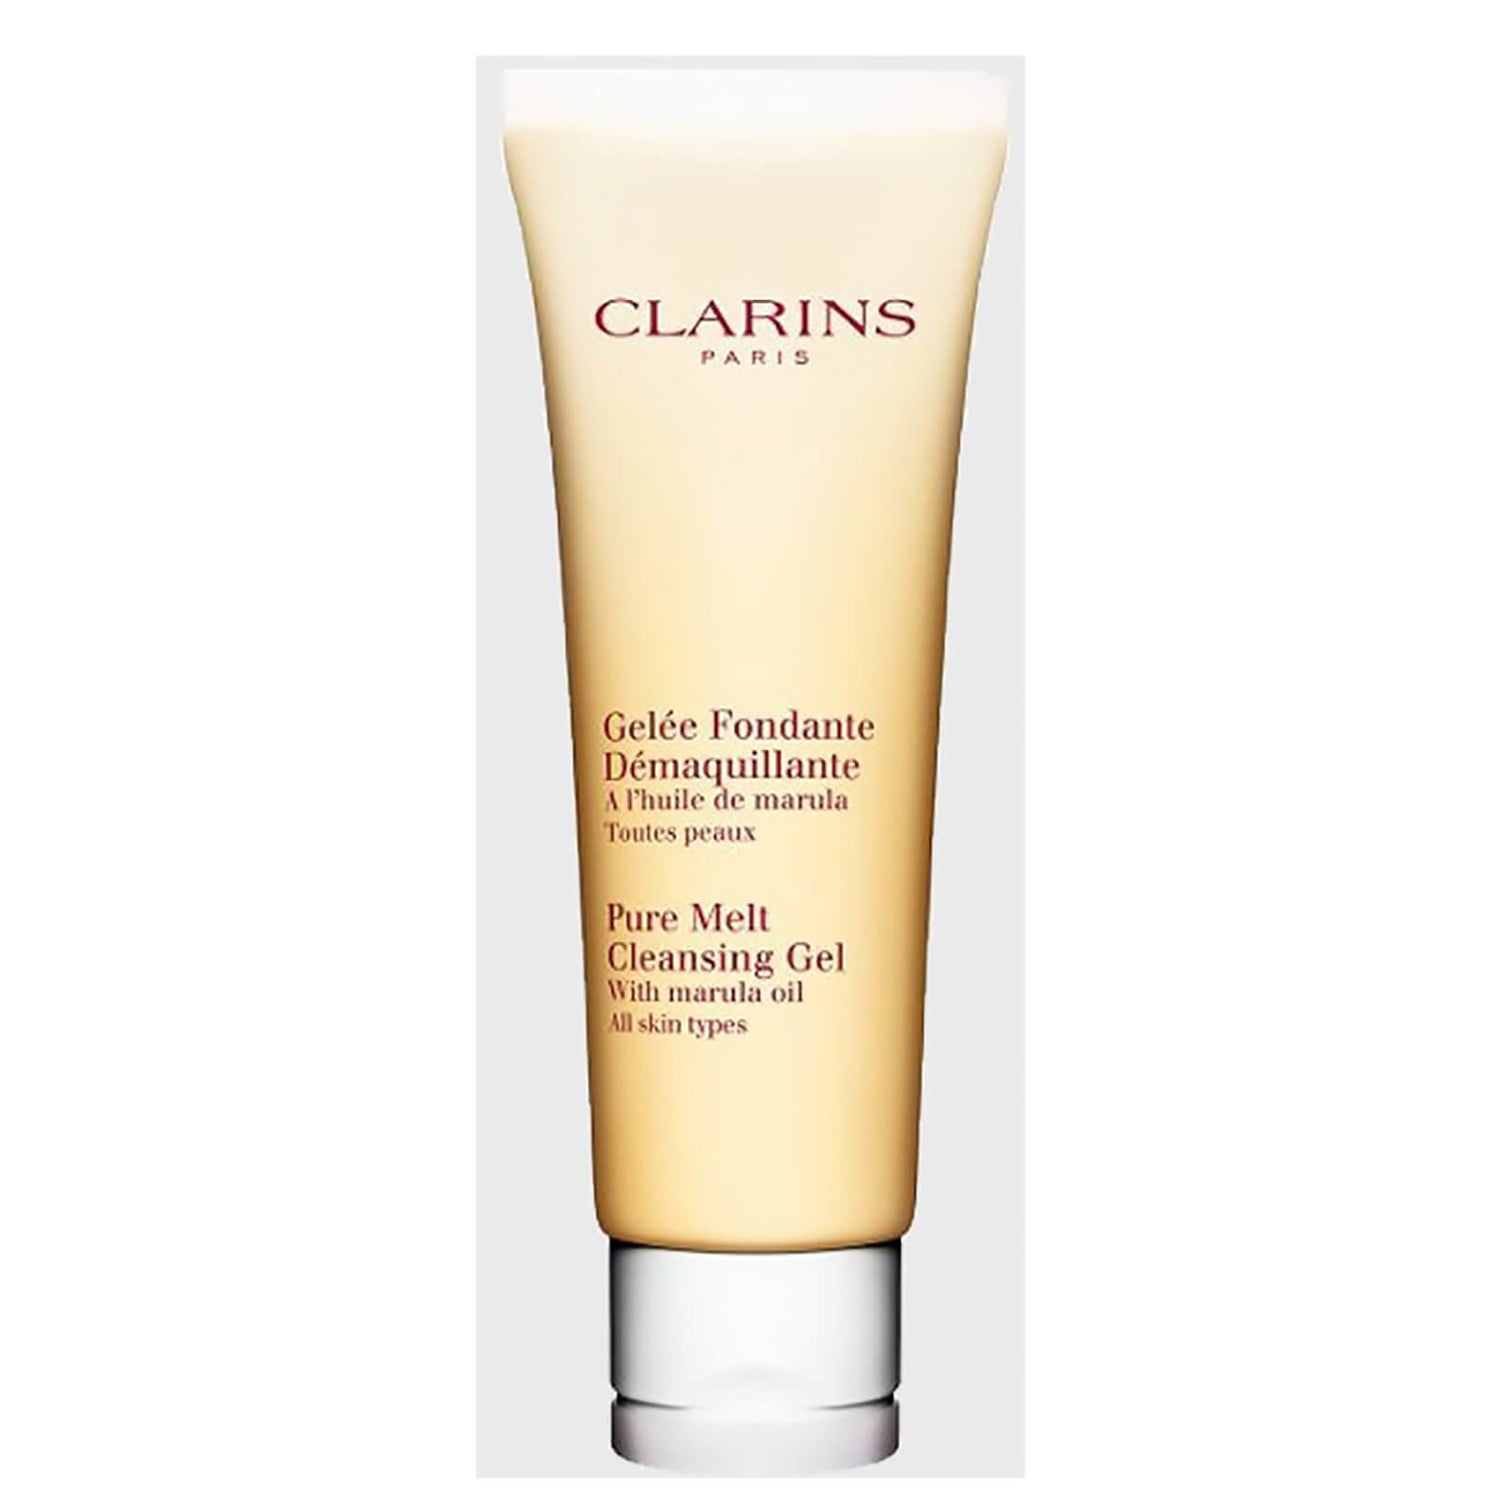 CLARINS PURE MELT CLEANSING GEL (125ML)